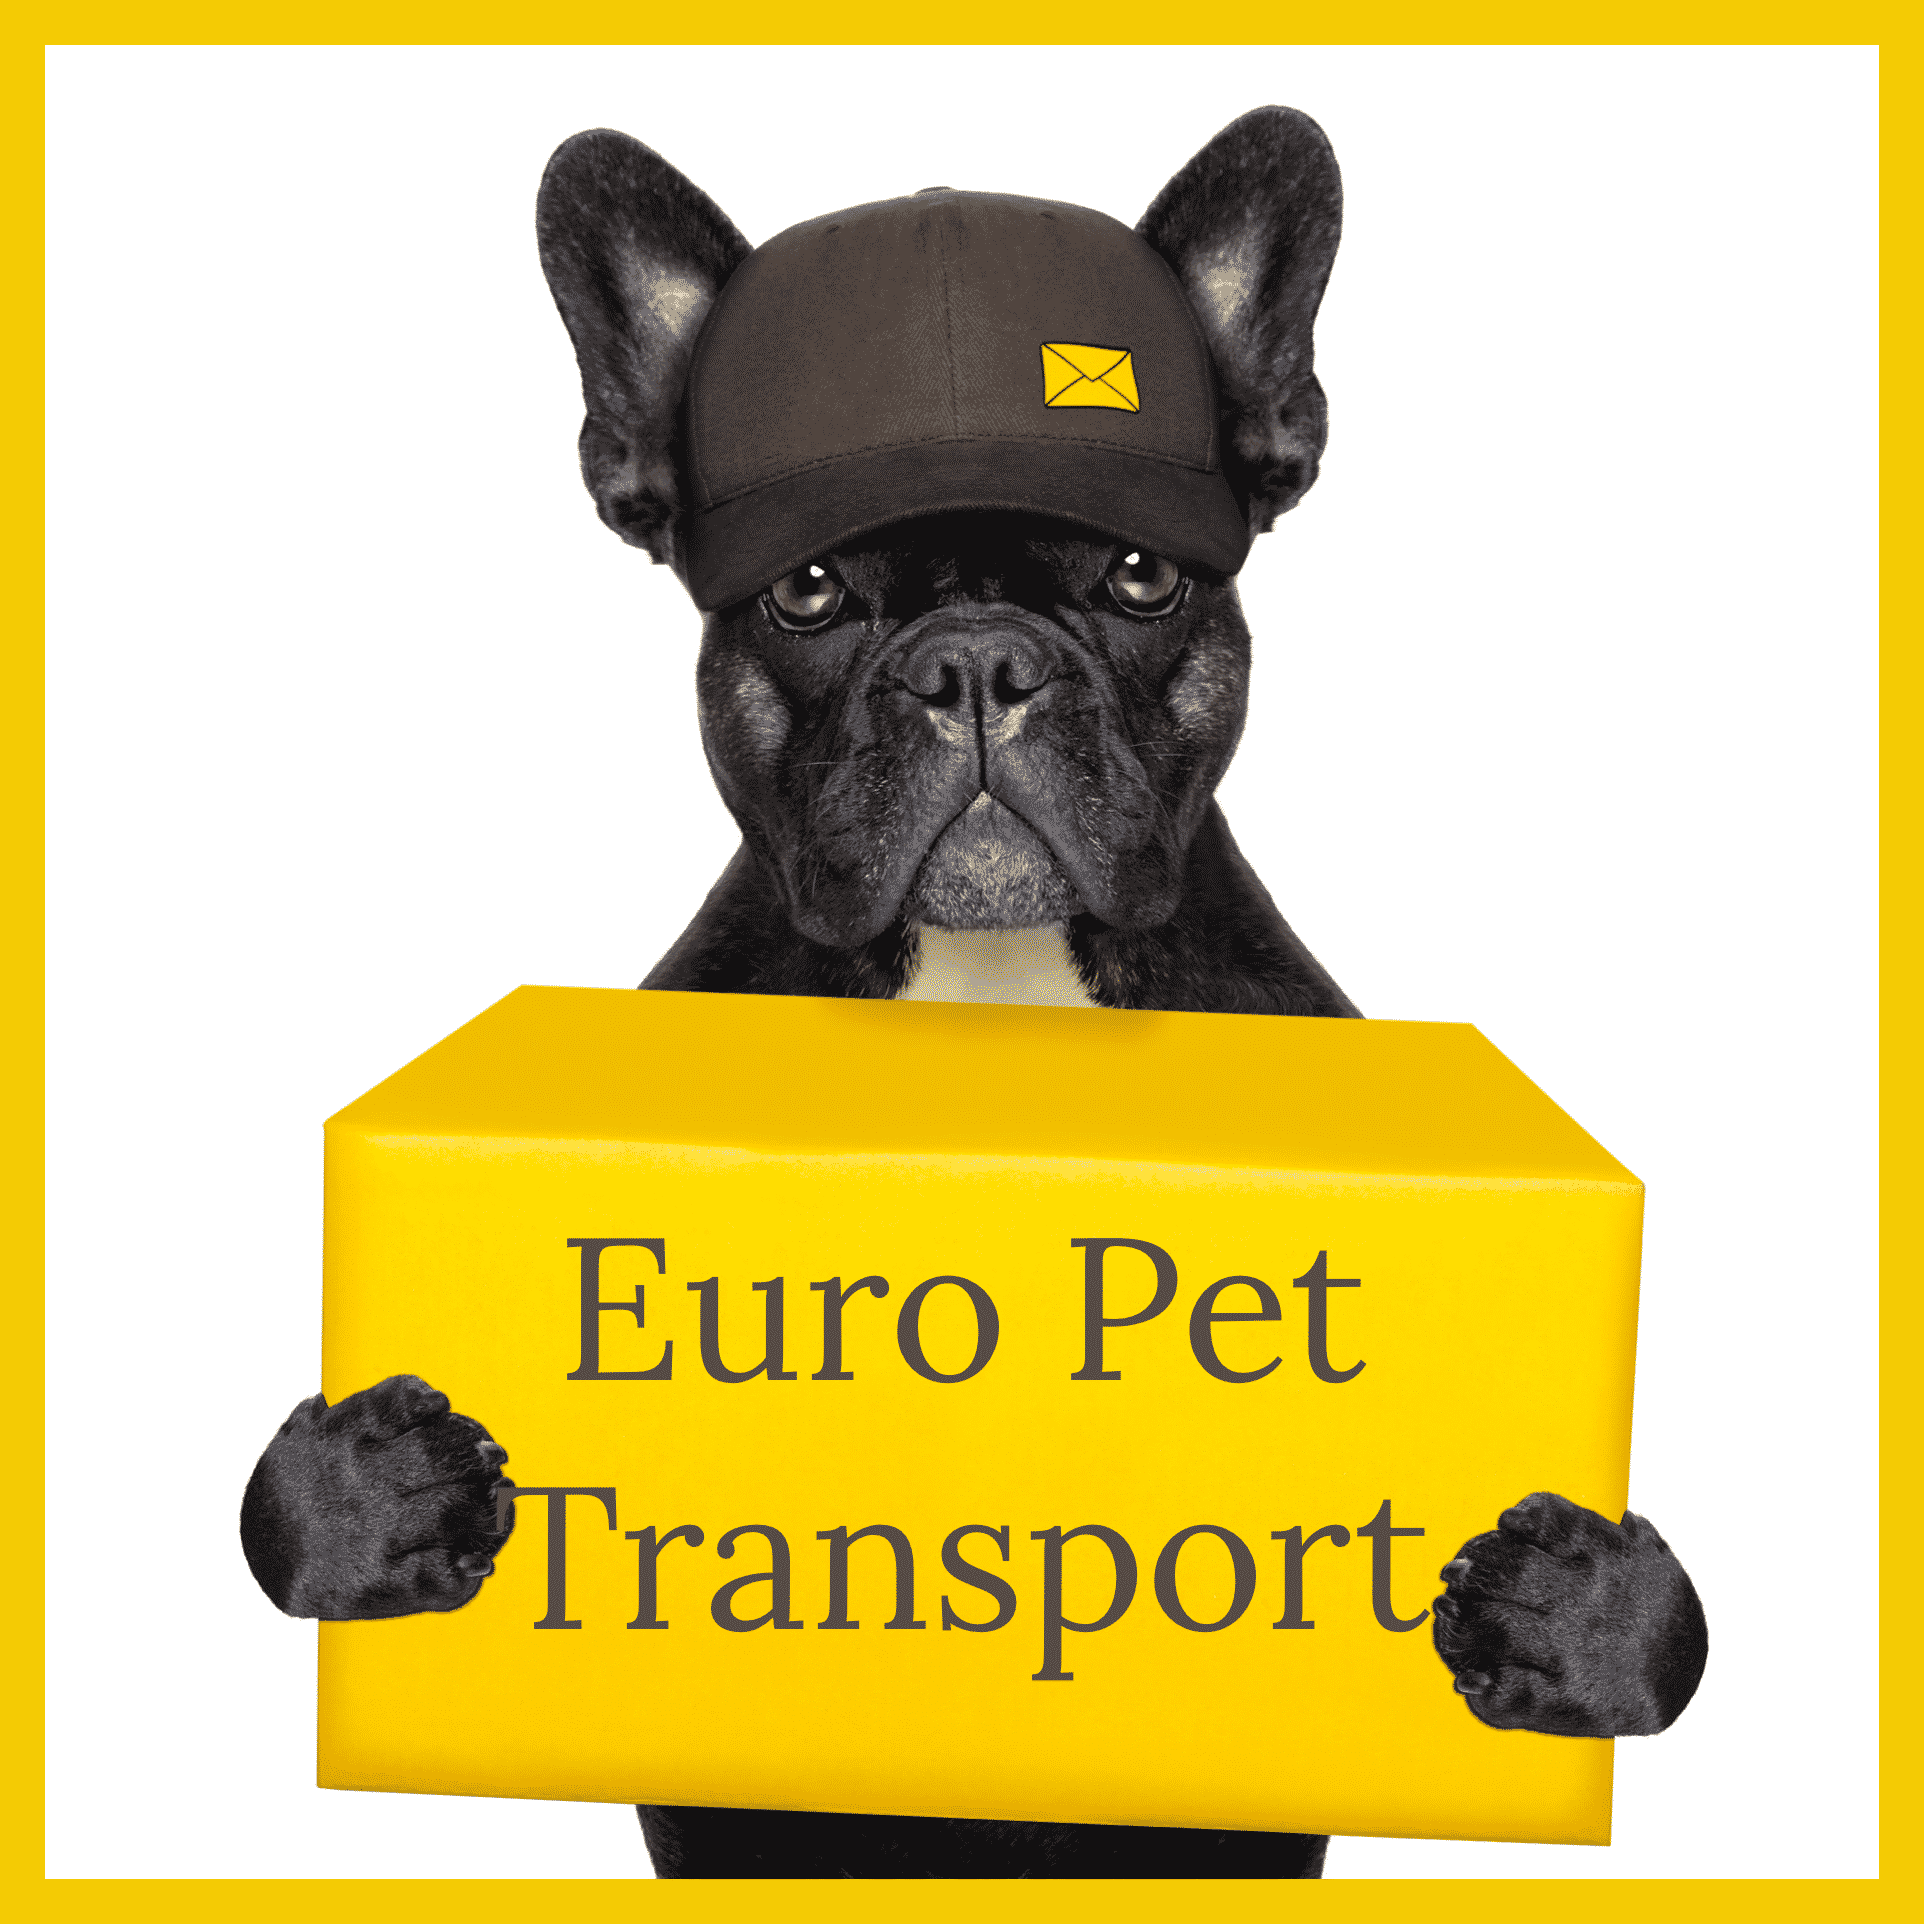 Euro Pet Transport pet couriers by road EU Spain Portugal France UK transport cats dogs rabbits ferrets